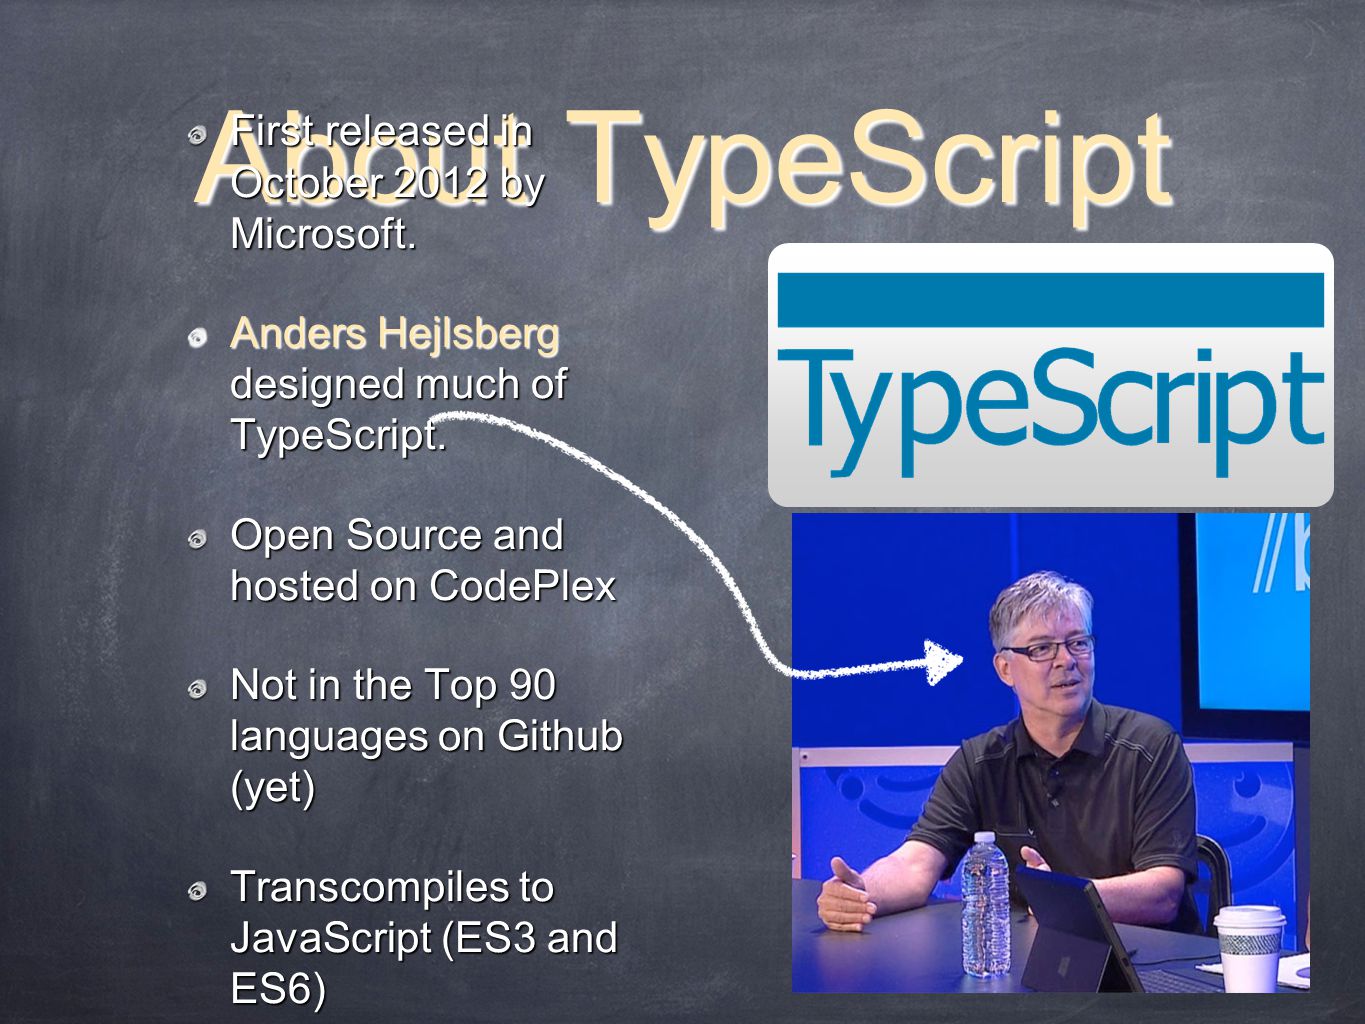 About TypeScript First released in October 2012 by Microsoft.